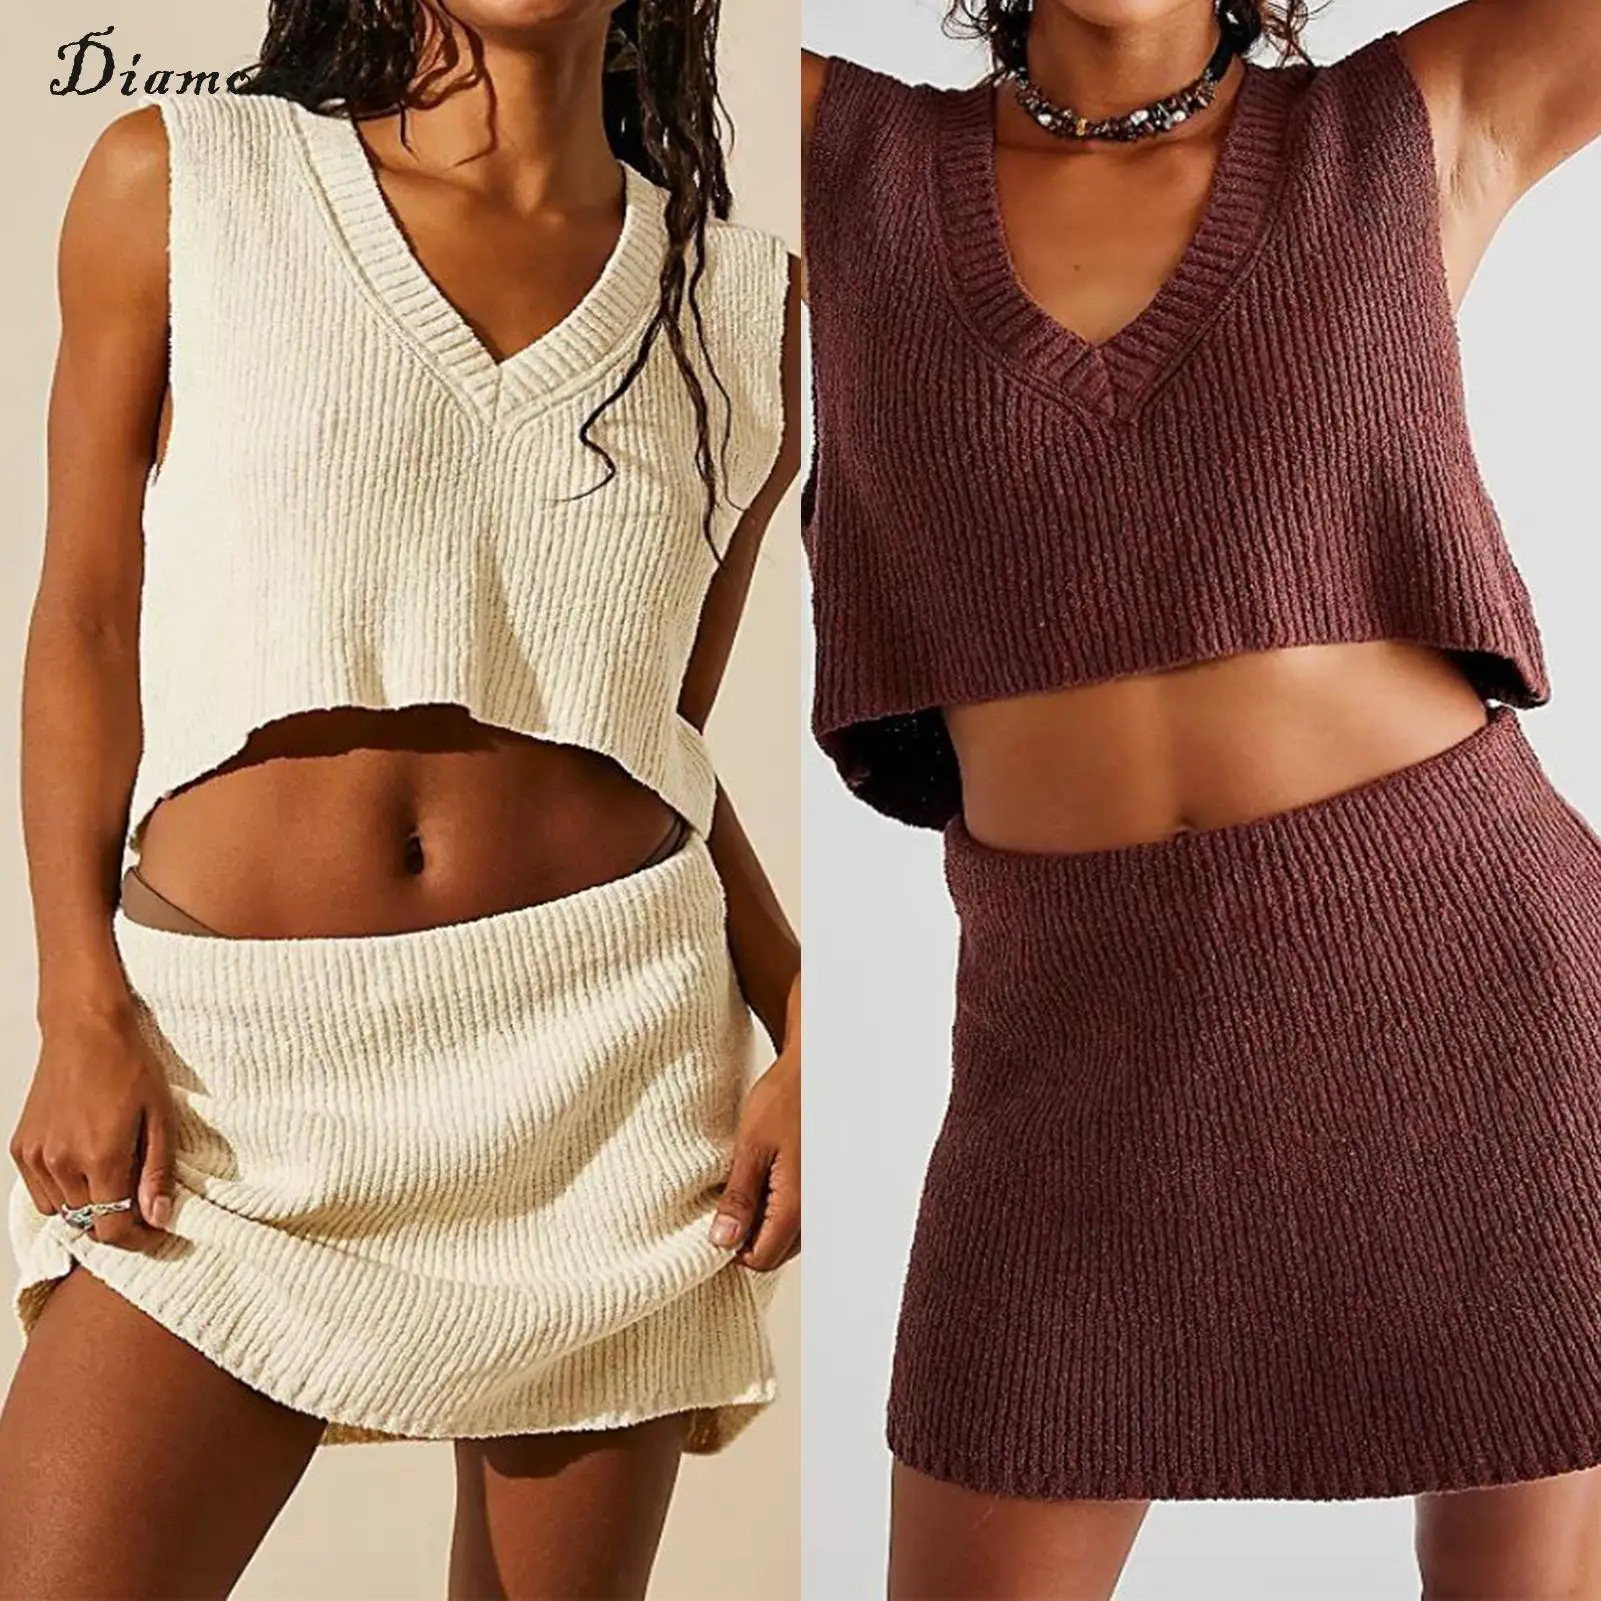 

Women Crochet Vest Top Skirt V Neck Ladies Knitted Mini Skirt Set Navel Exposed High Waist Casual Sexy Vacation Outfit